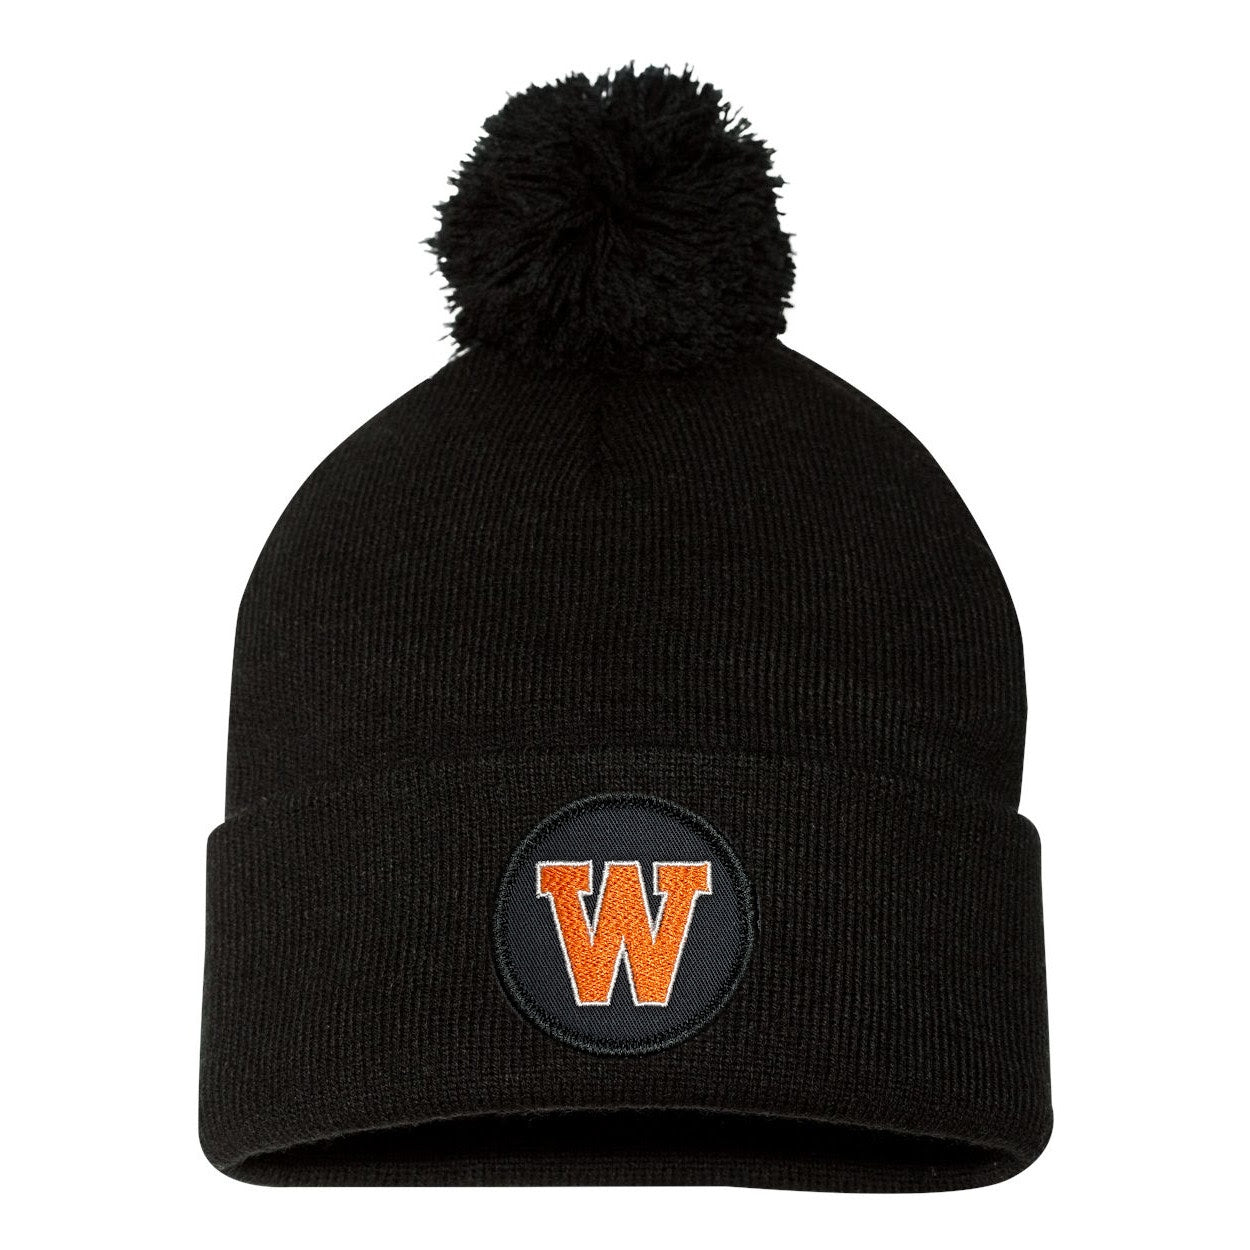 Black Circular Patched West De Pere Logo Beanies - 6 options